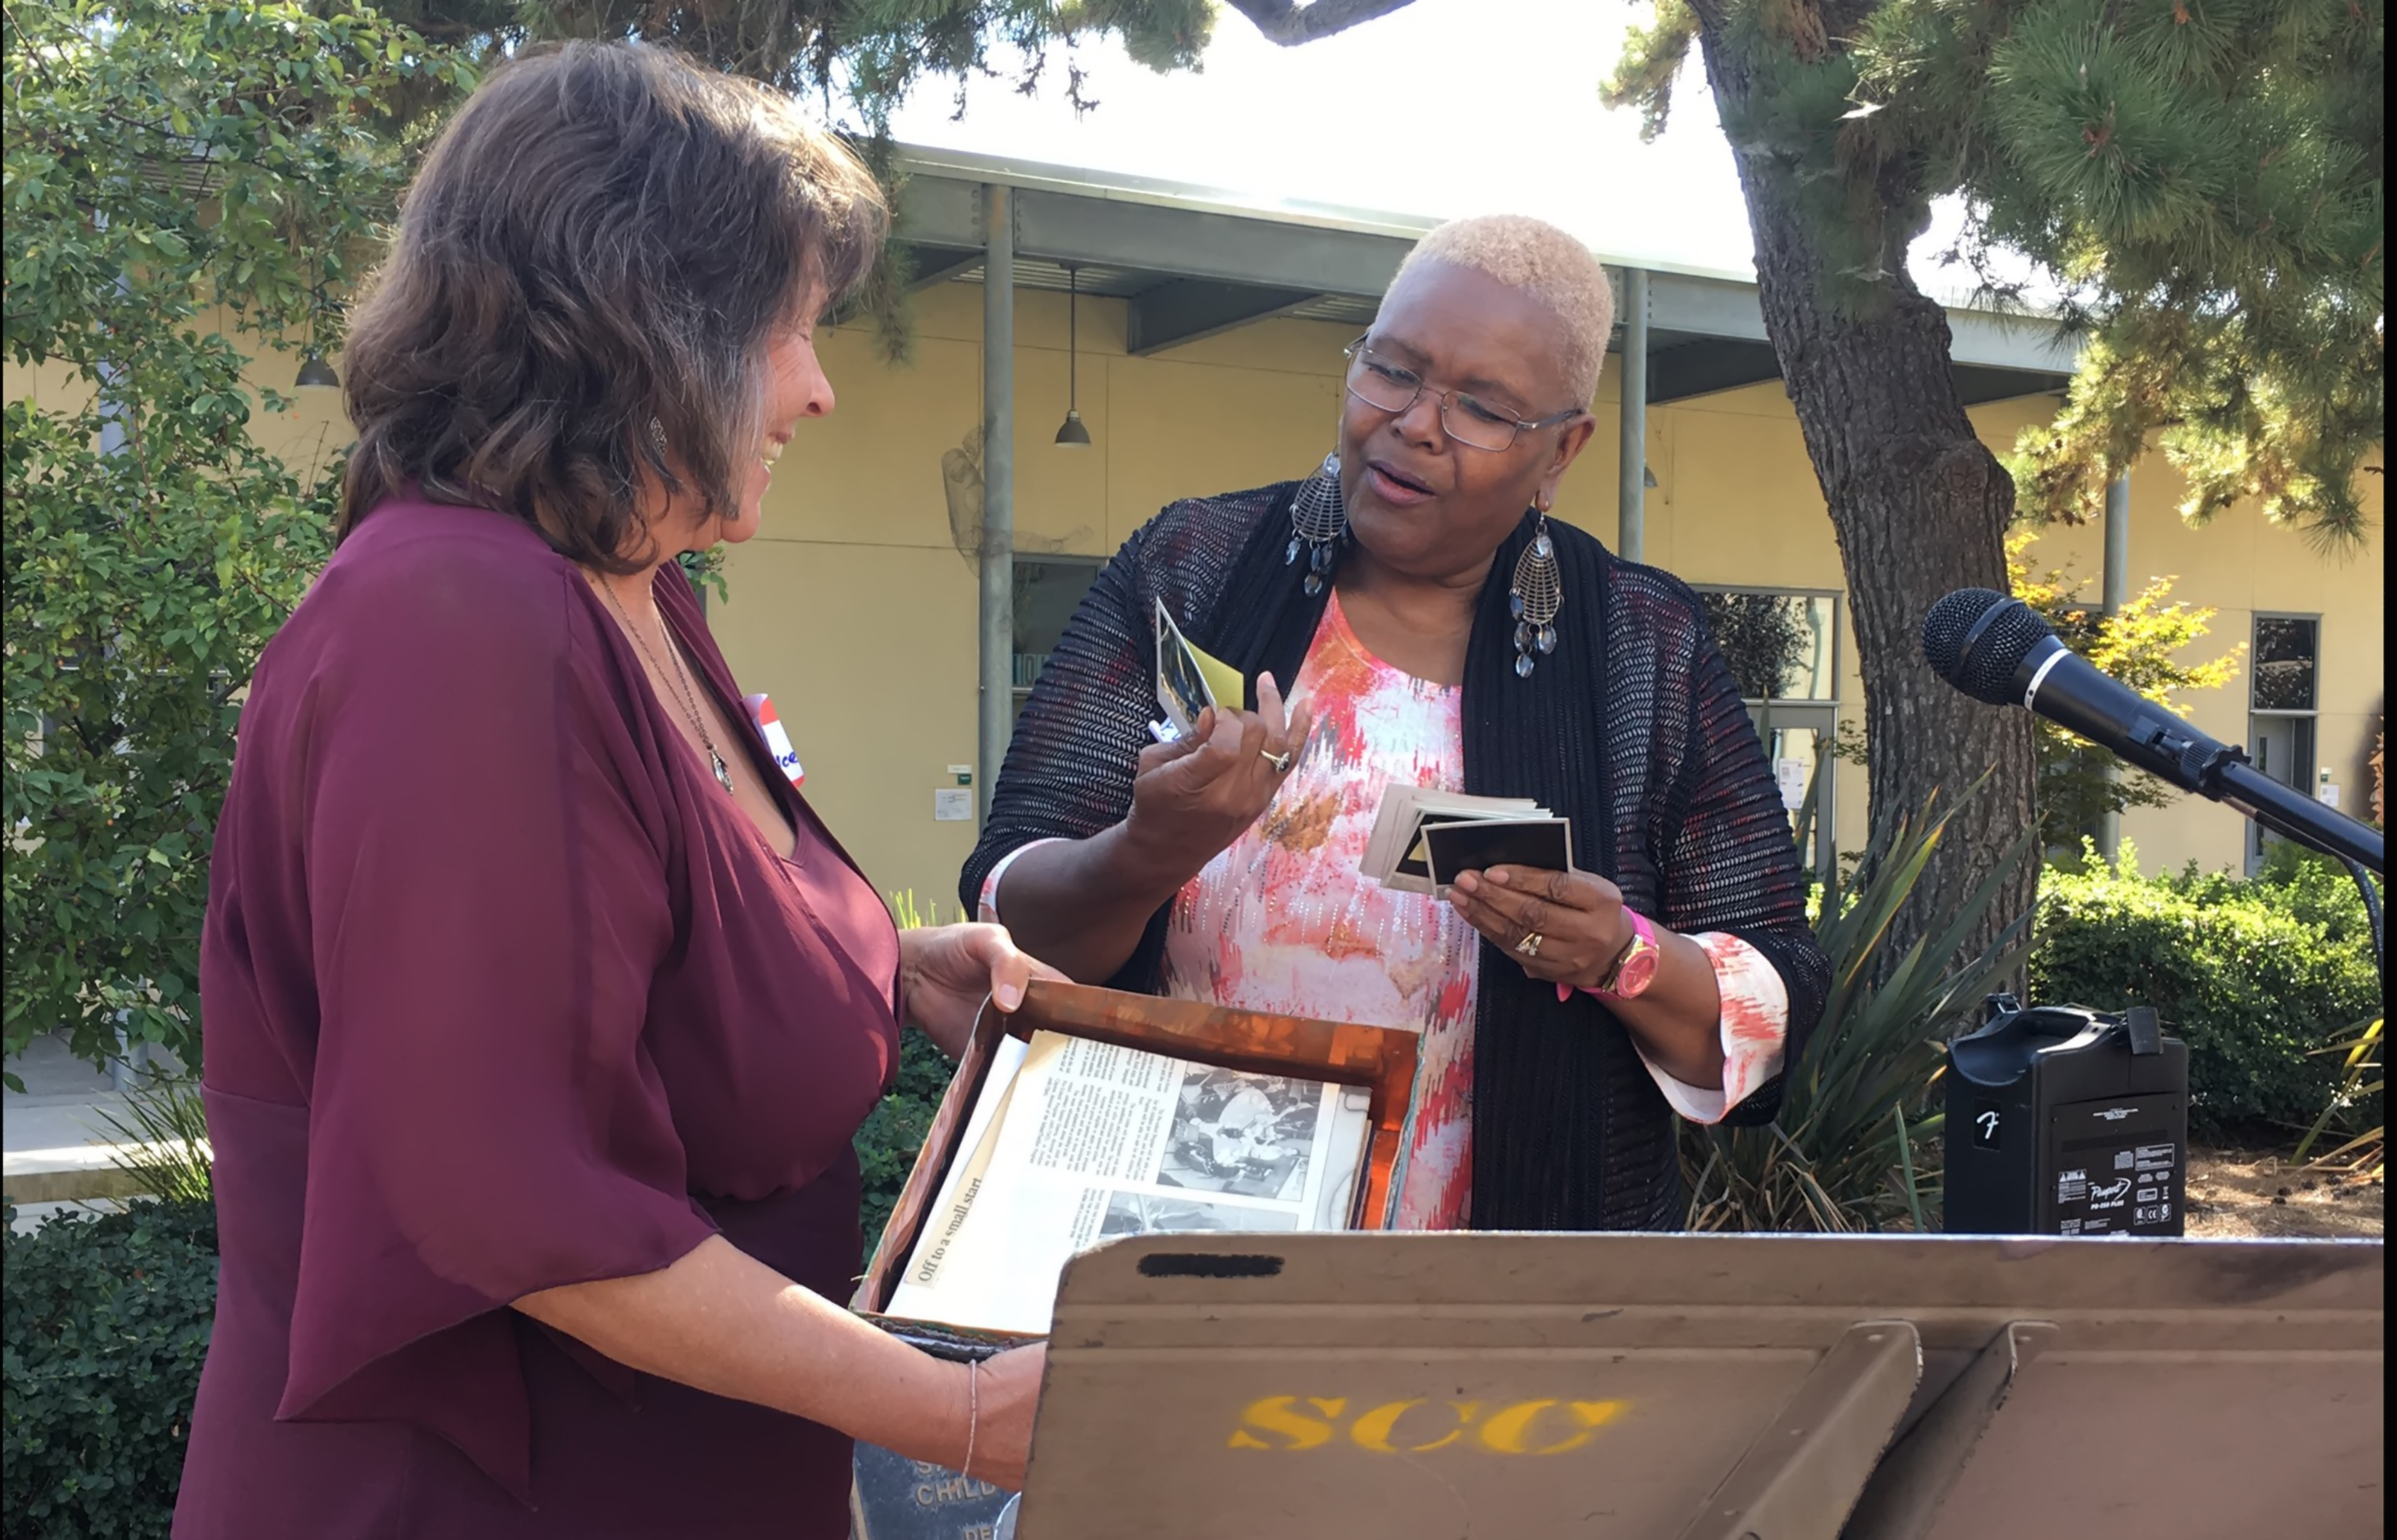 Luretta Bruce (R) and Eunice Graves (L) show pictures from the Child Development Center Time Capsule buried in 1993, the time capsule was opened at City College on Oct. 7. The center was the first childcare center on a community college campus in the state. Photo by Zachary FR Anderson